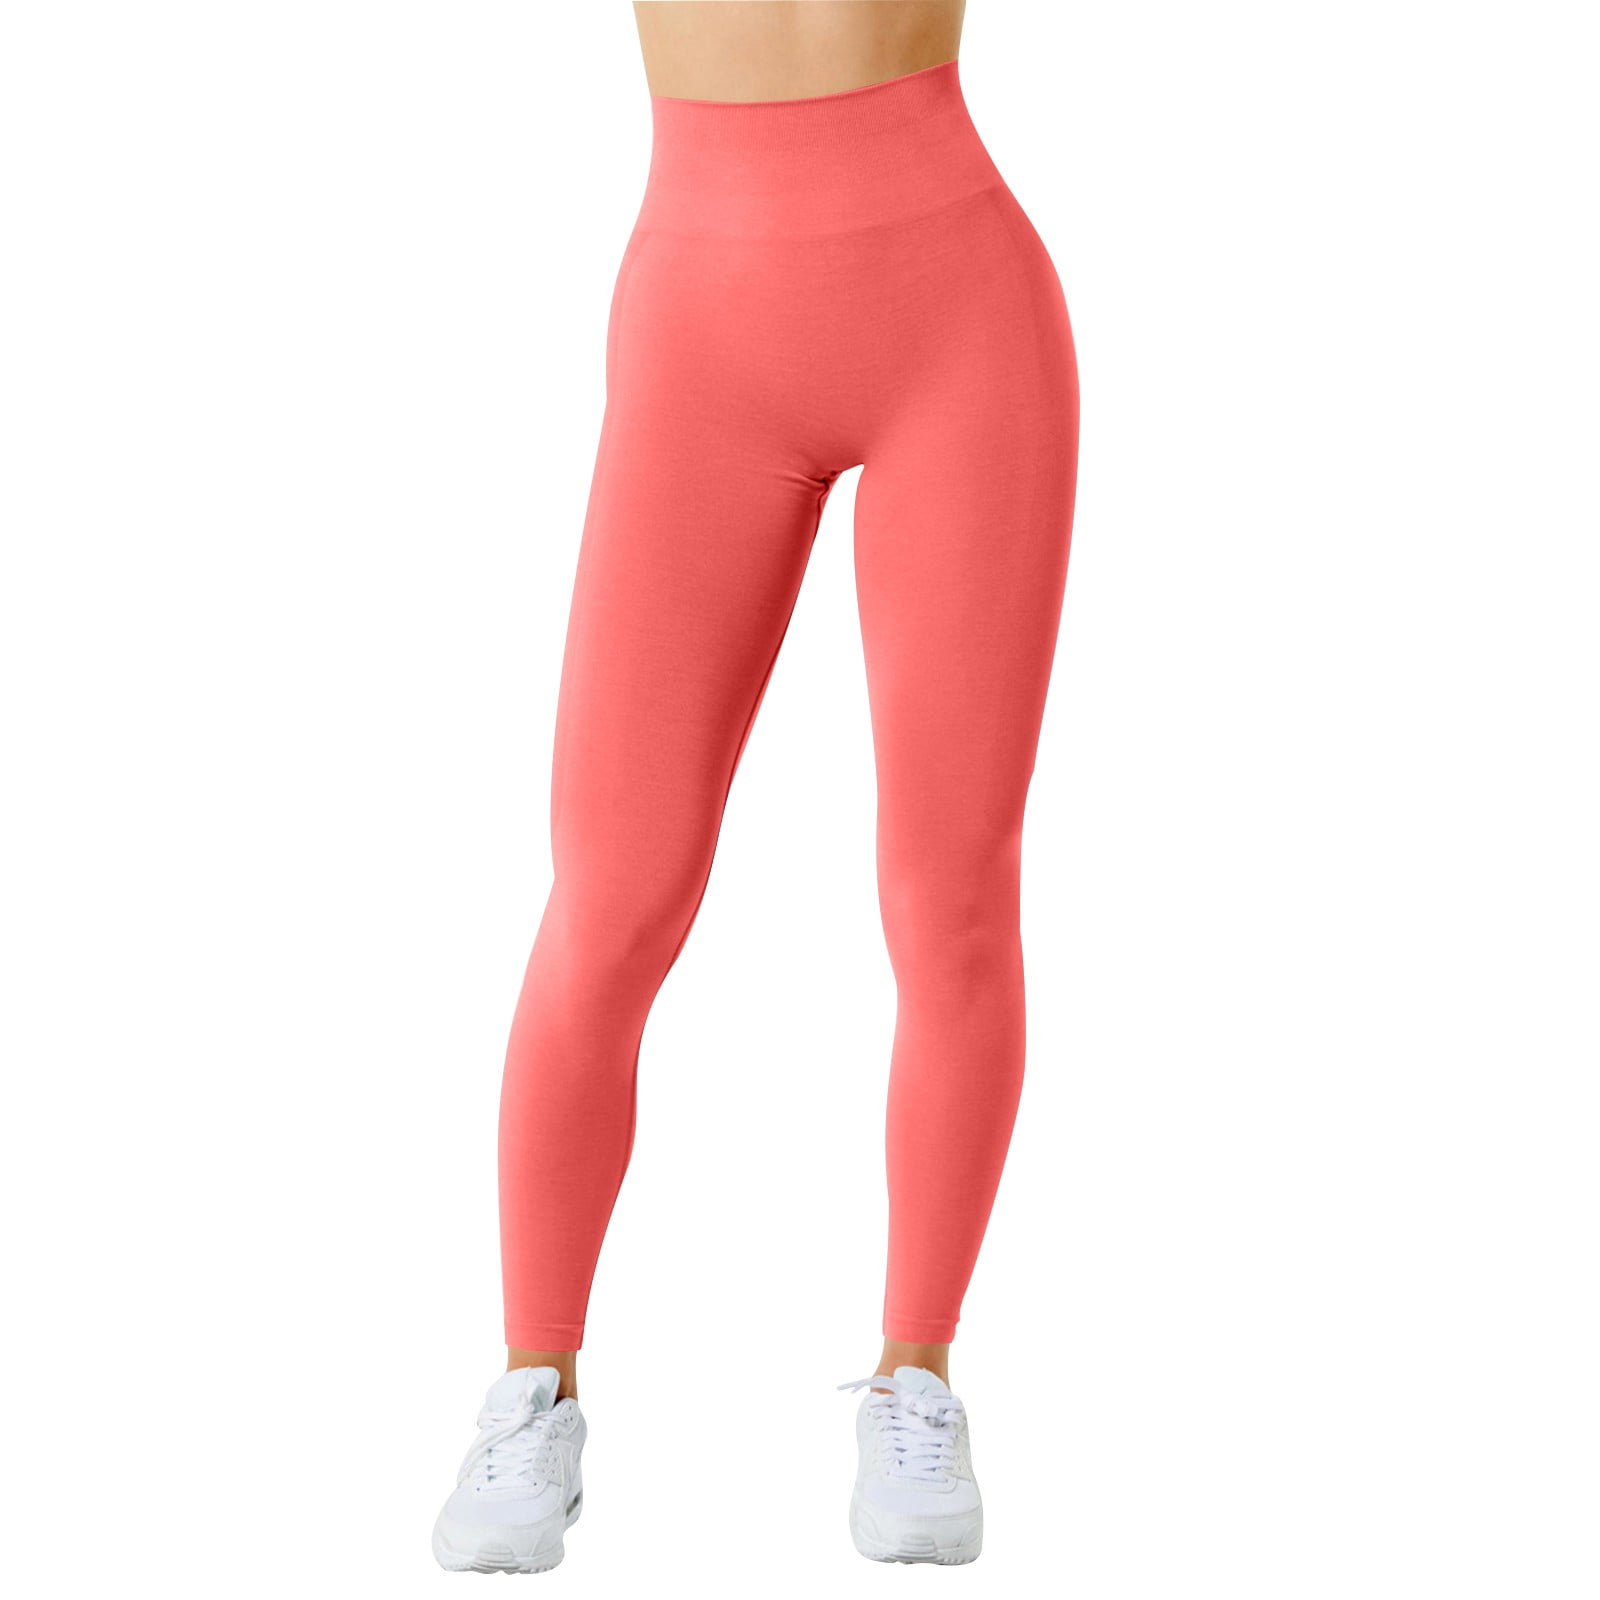 xinqinghao yoga leggings for women women's seamless tight high waisted  elastic quick dry breathable exercise pants yoga pants women yoga pants  watermelon red m 